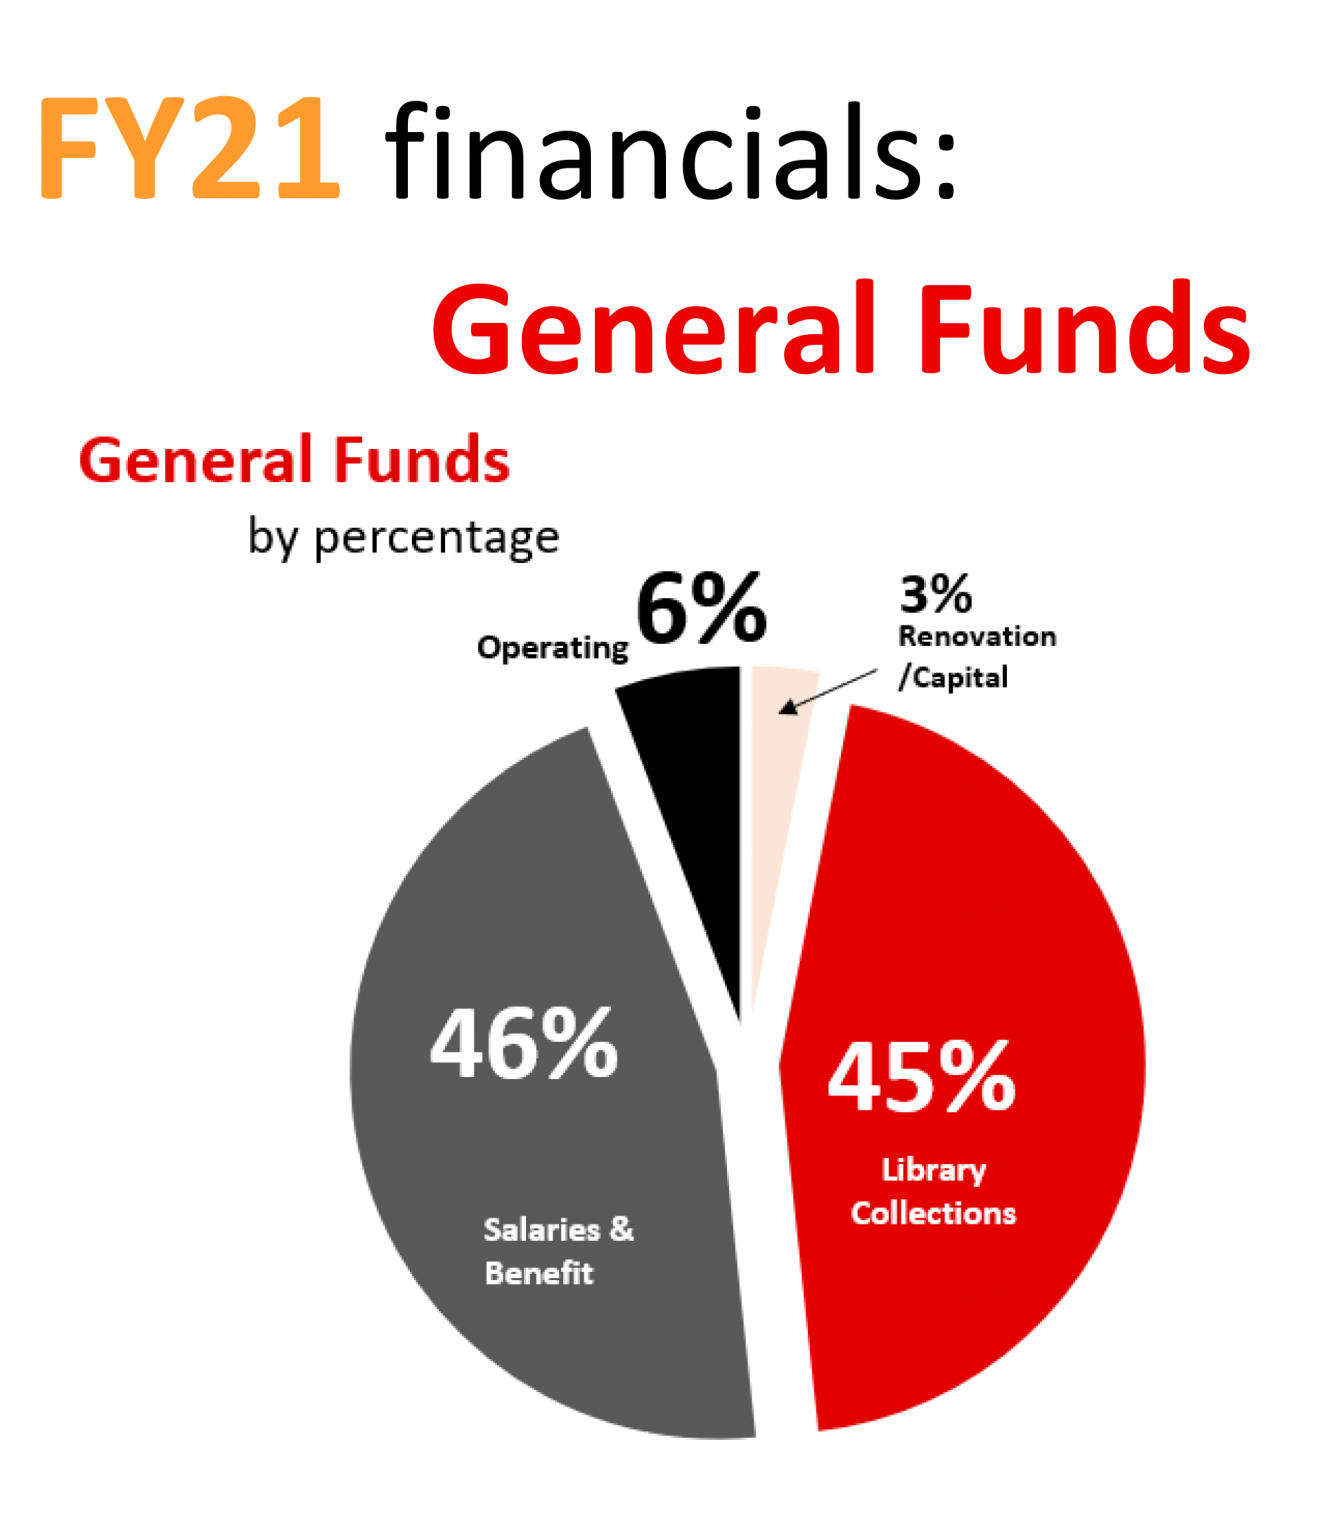 pie chart of general funds